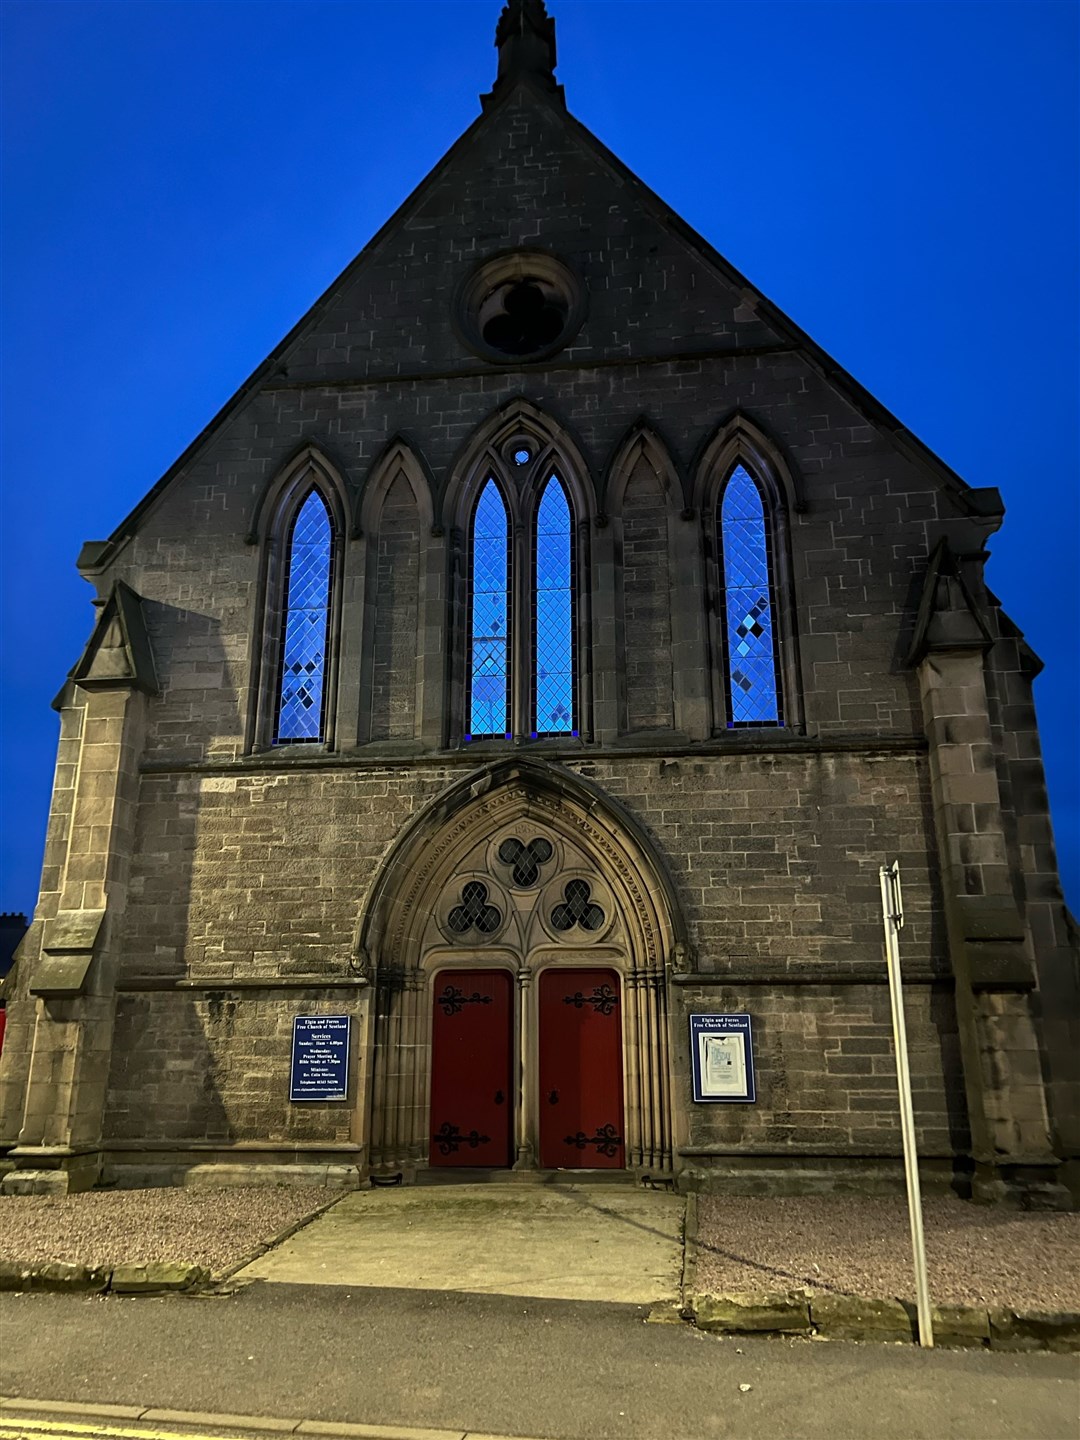 South Street Free Church in Elgin was lit up blue, matching the evening sky.